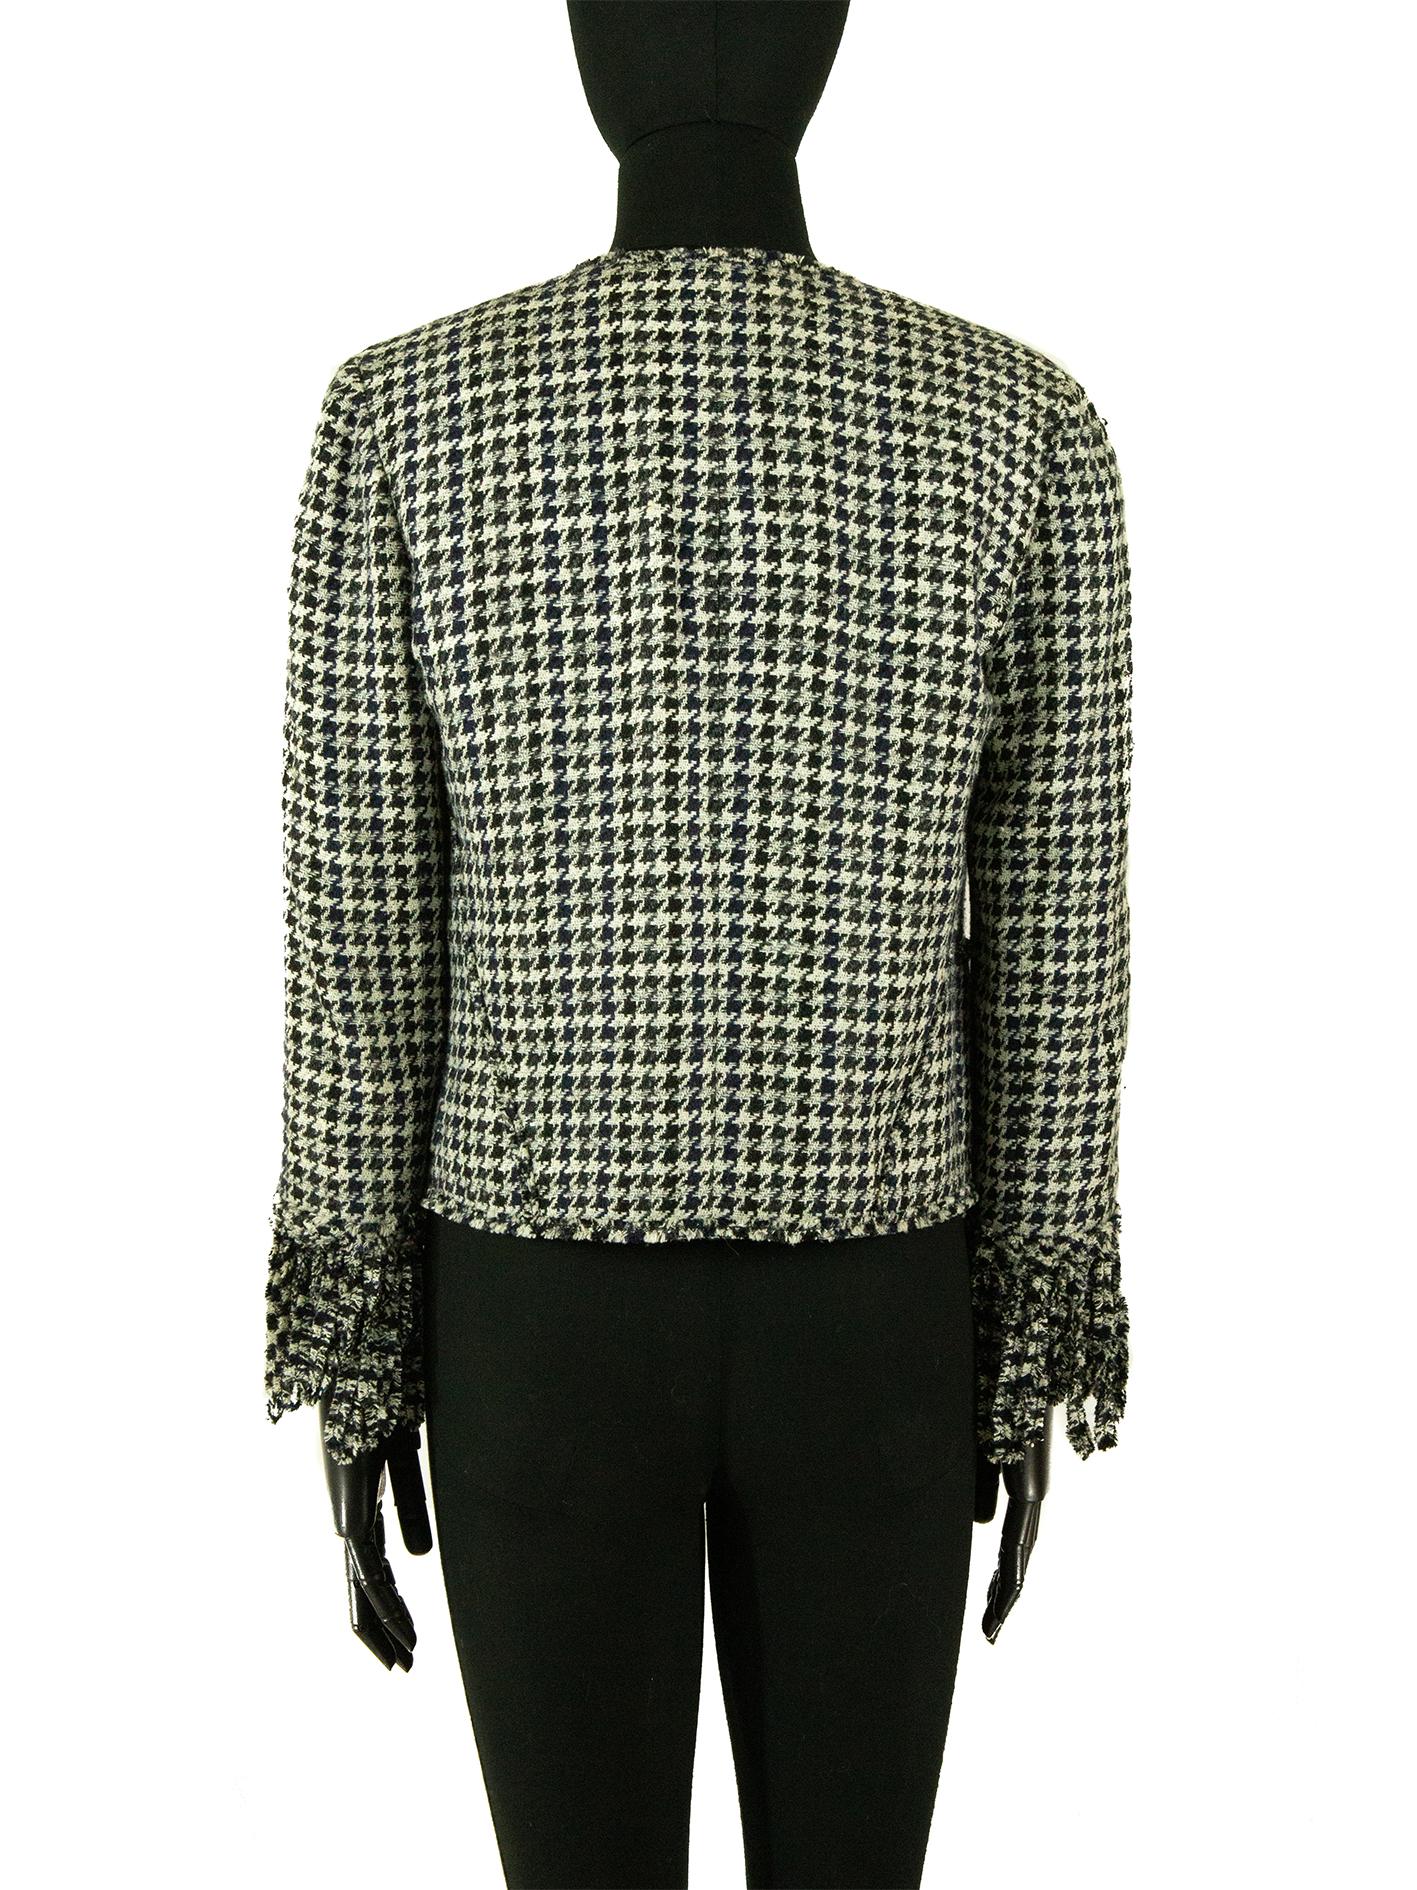 Chanel Spring 2007 Dogtooth Jacket In Good Condition For Sale In London, GB